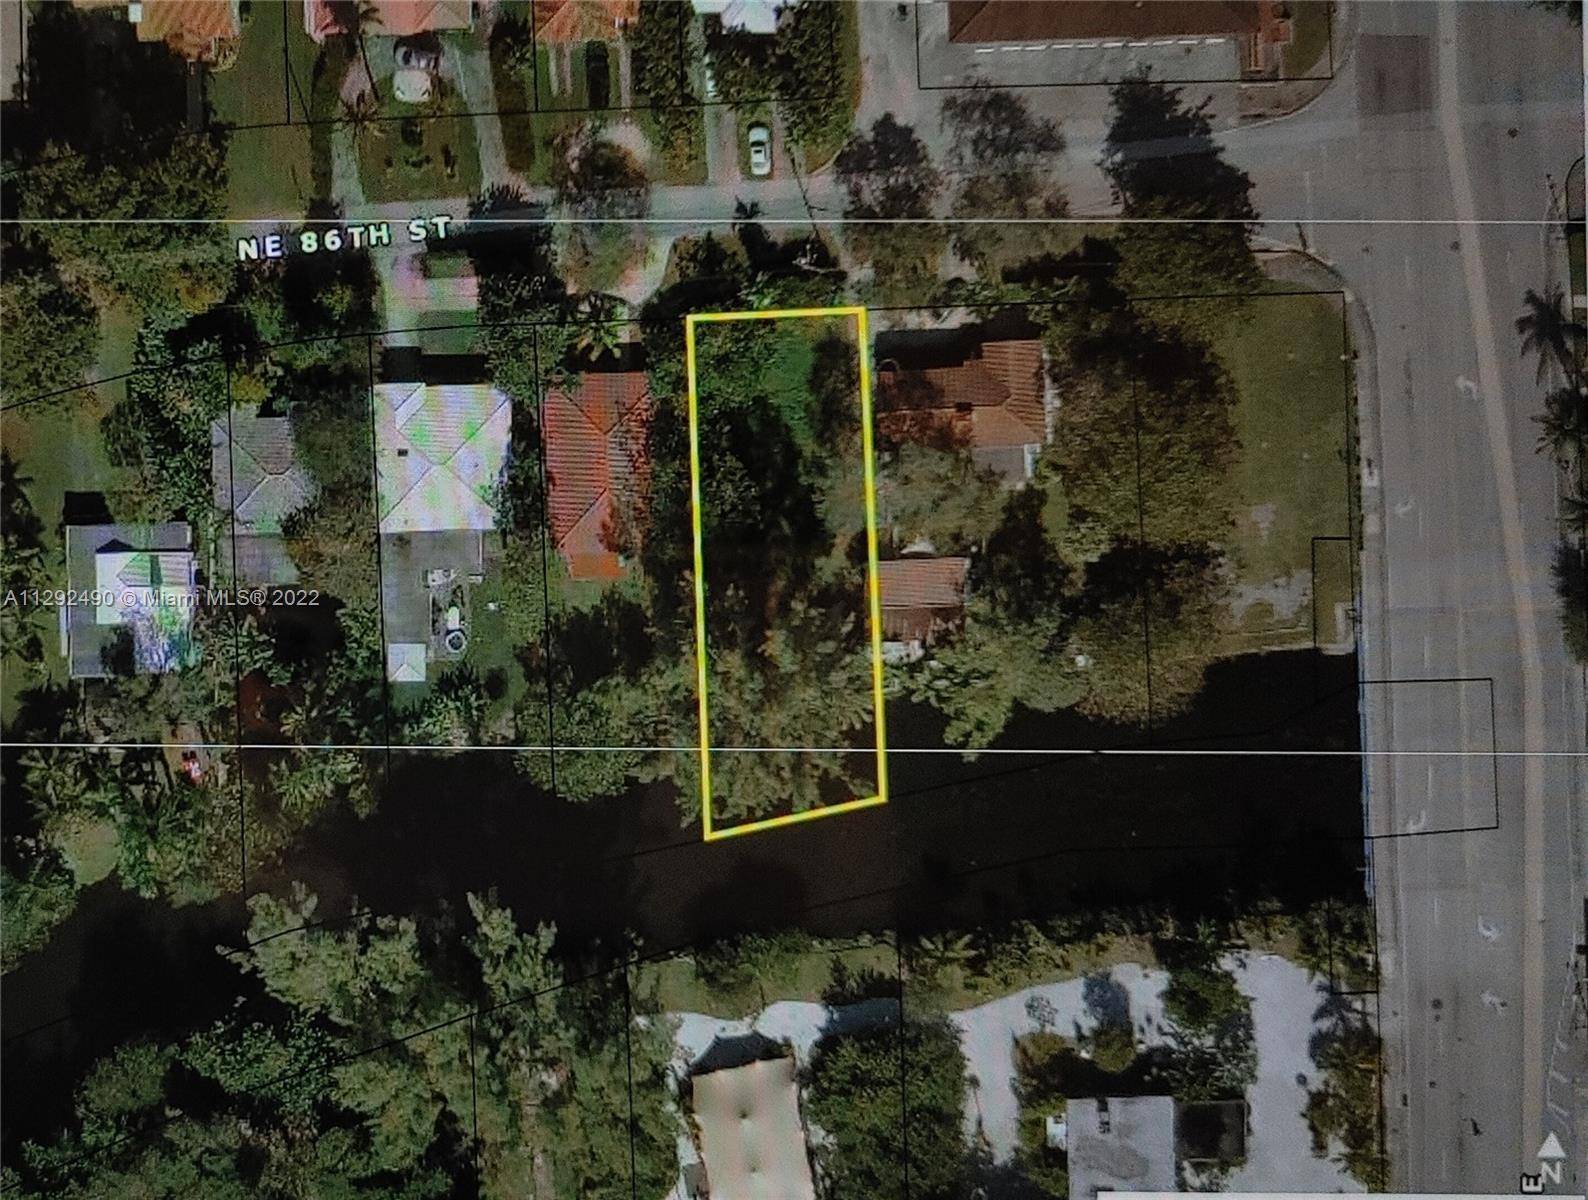 Waterfront 50x159 vacant land zoned residential to build dream home max 2 stories, room for pool, centrally located in historic Little River in the Village of El Portal, blocks from ...